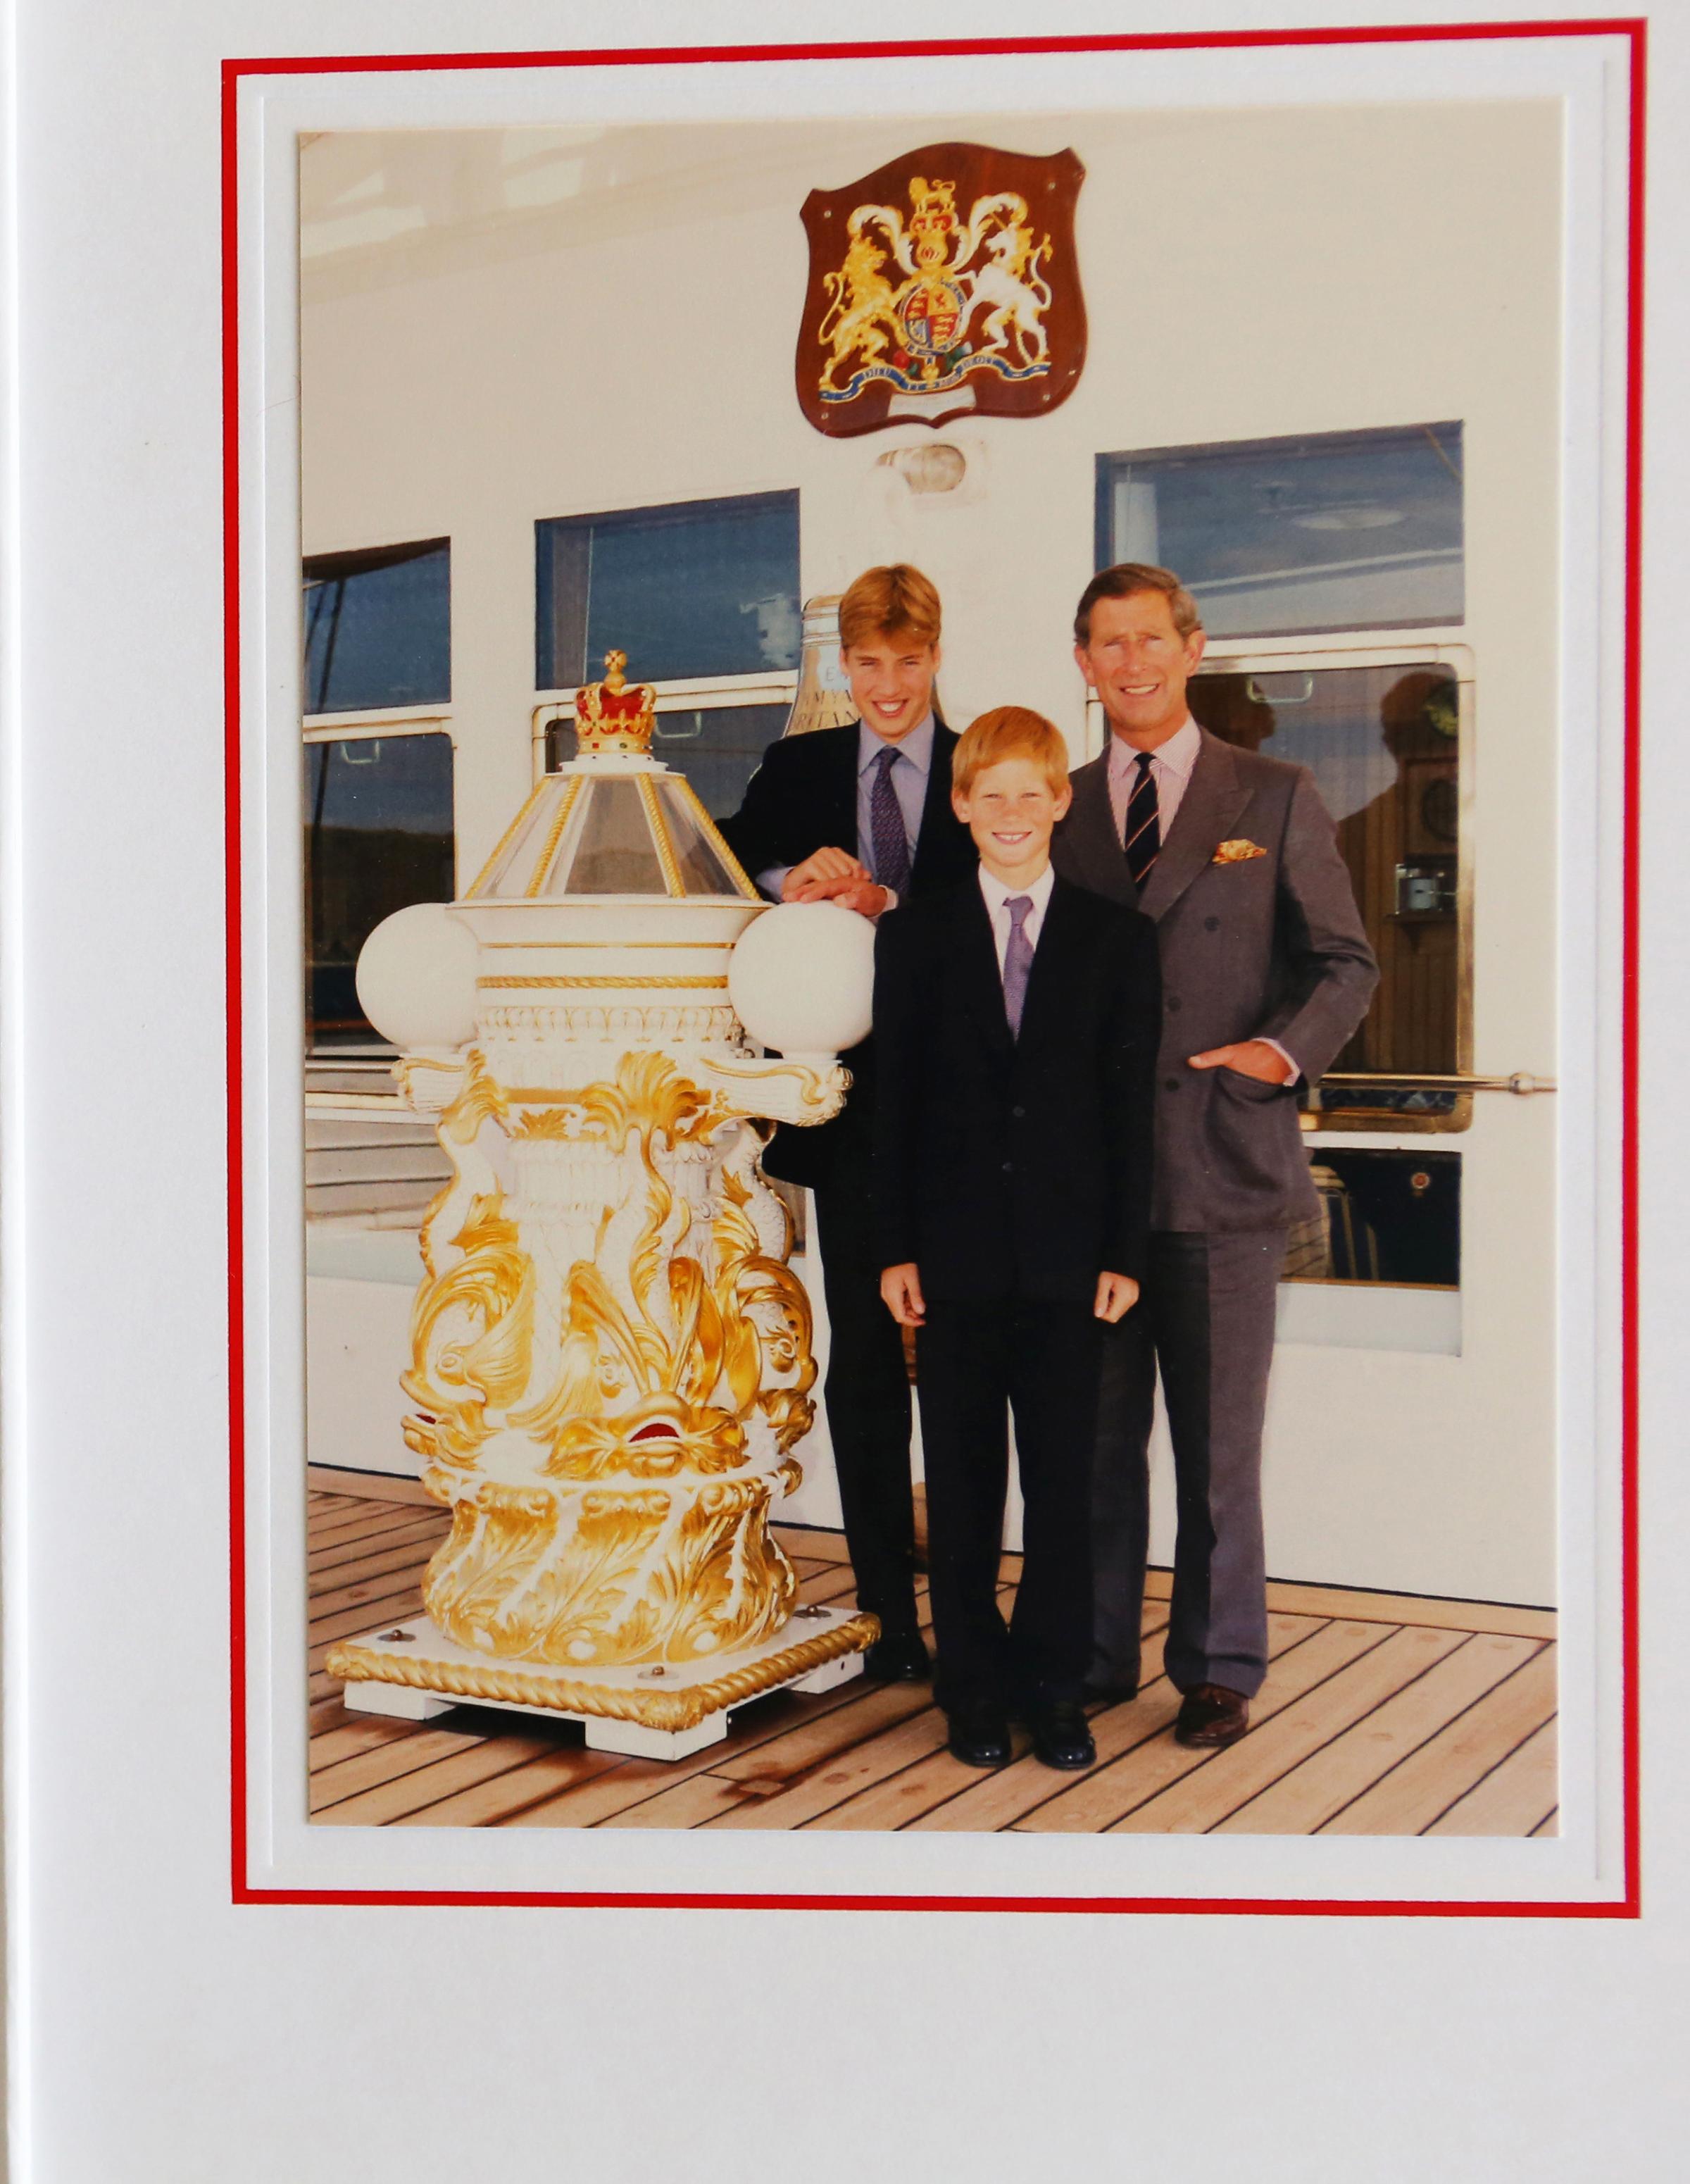 1997 Royal Christmas Card. Prince Charles with his children William and Harry. The photograph was taken just days before the death of Princess Diana.